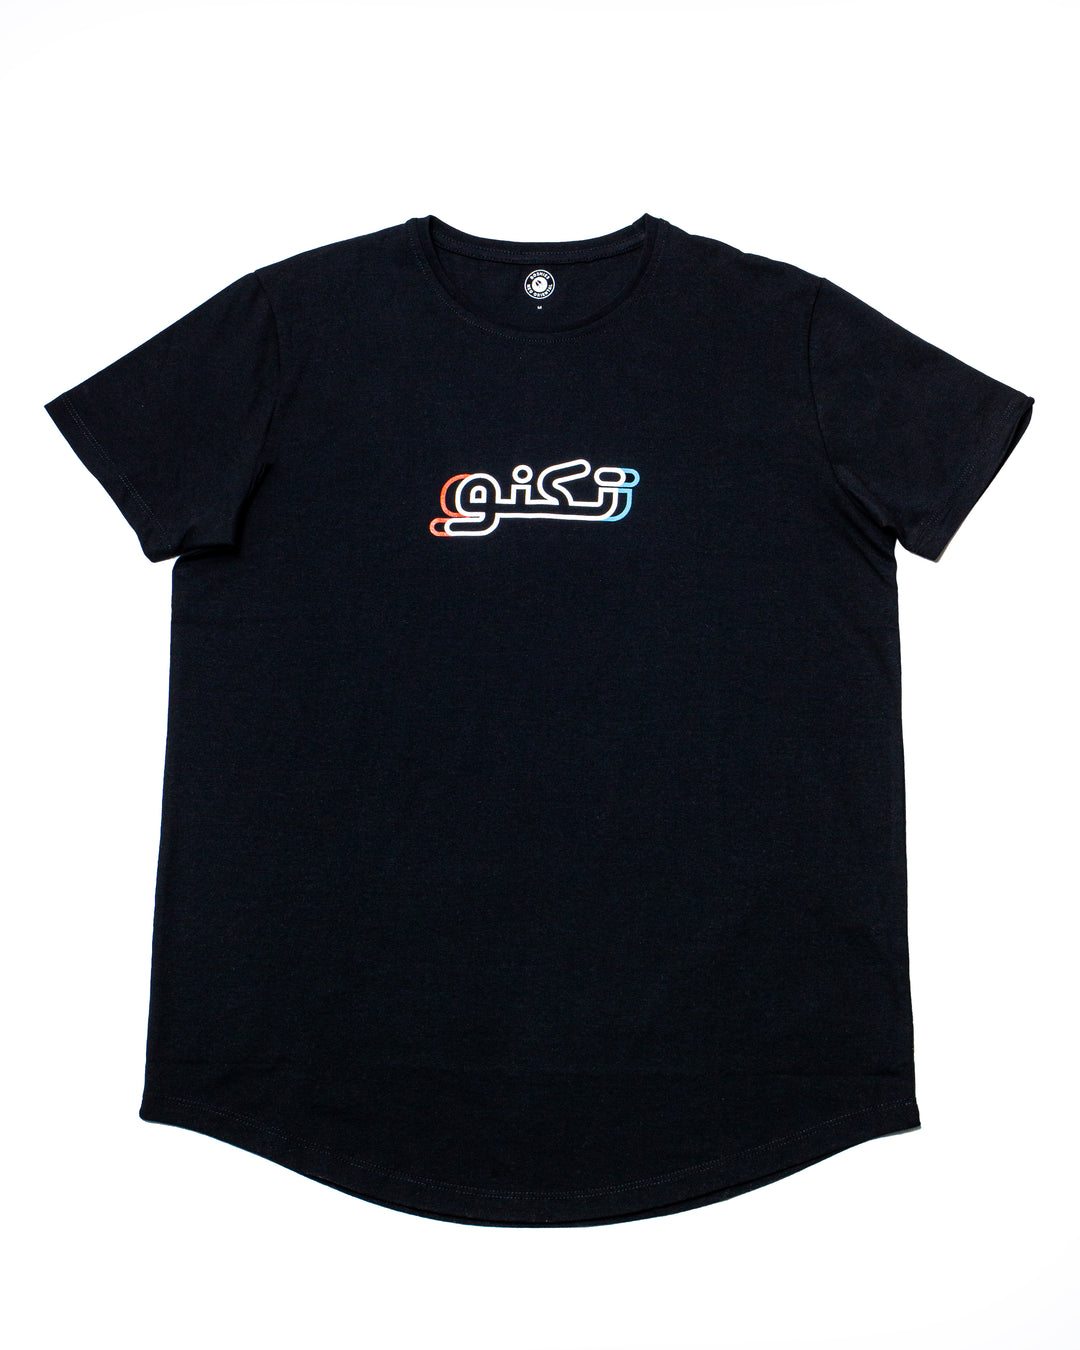 Black T-shirt with Techno written in Arabic تكنو and printed in blue, red and white silkscreen in the center of the T-shirt.